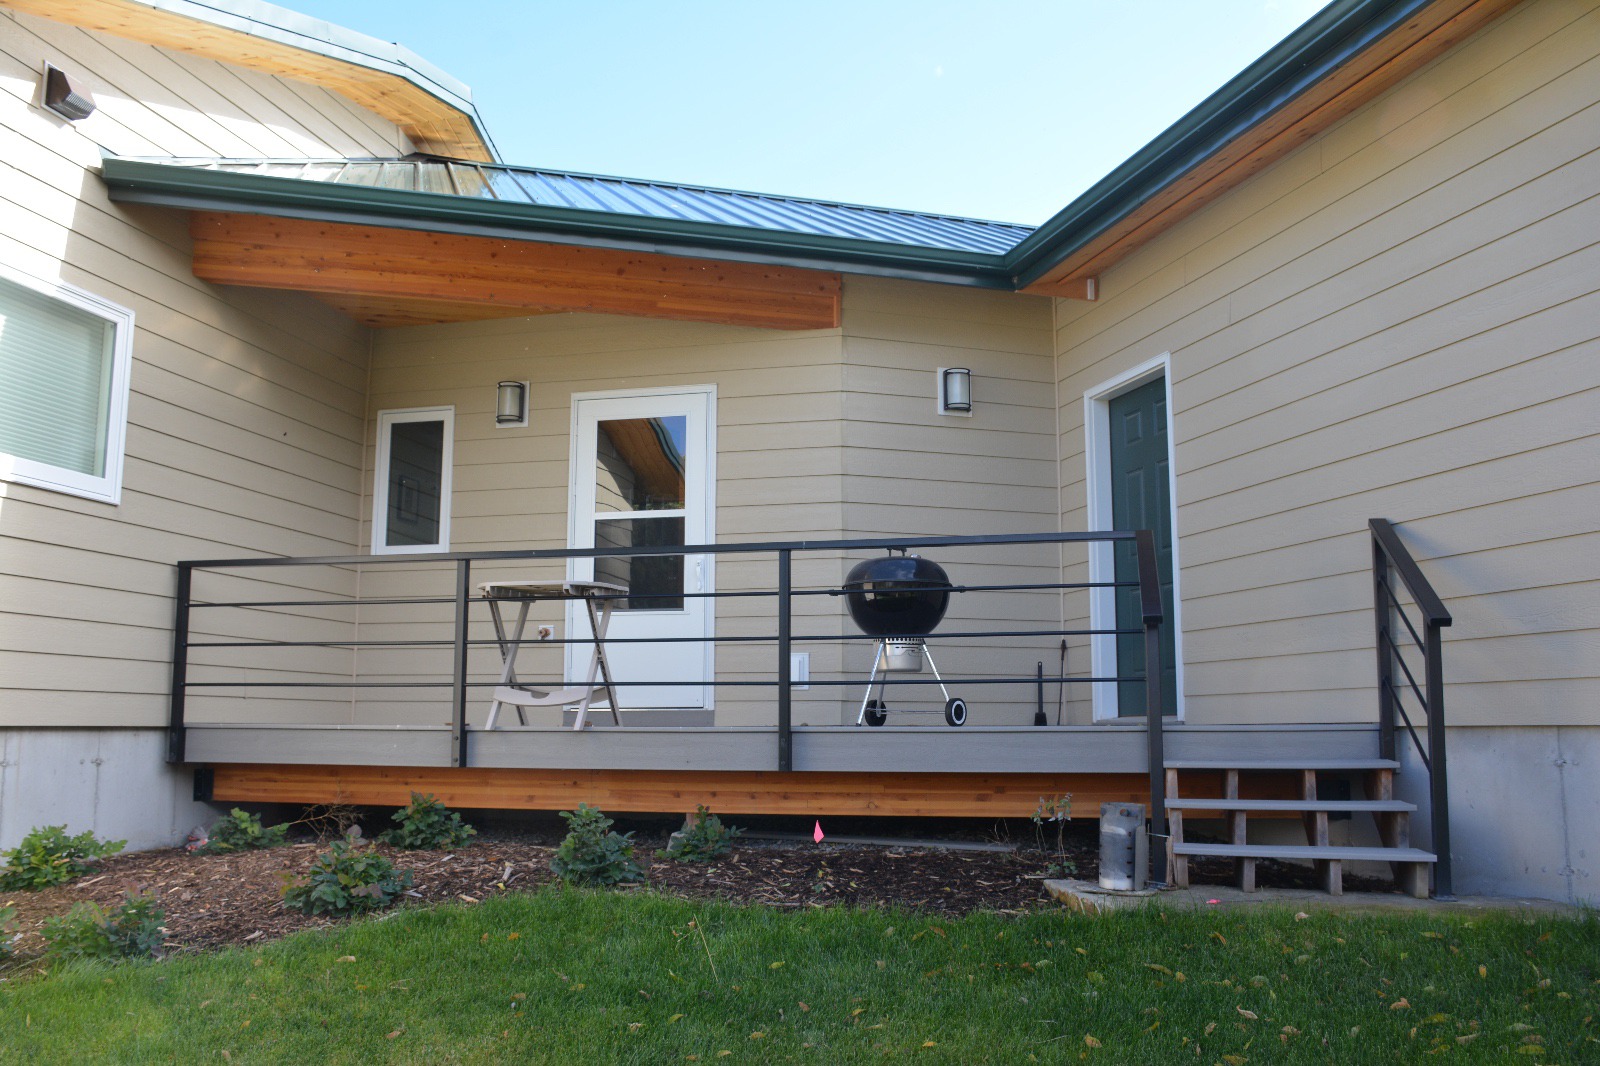 Exterior porch with custom steel handrail